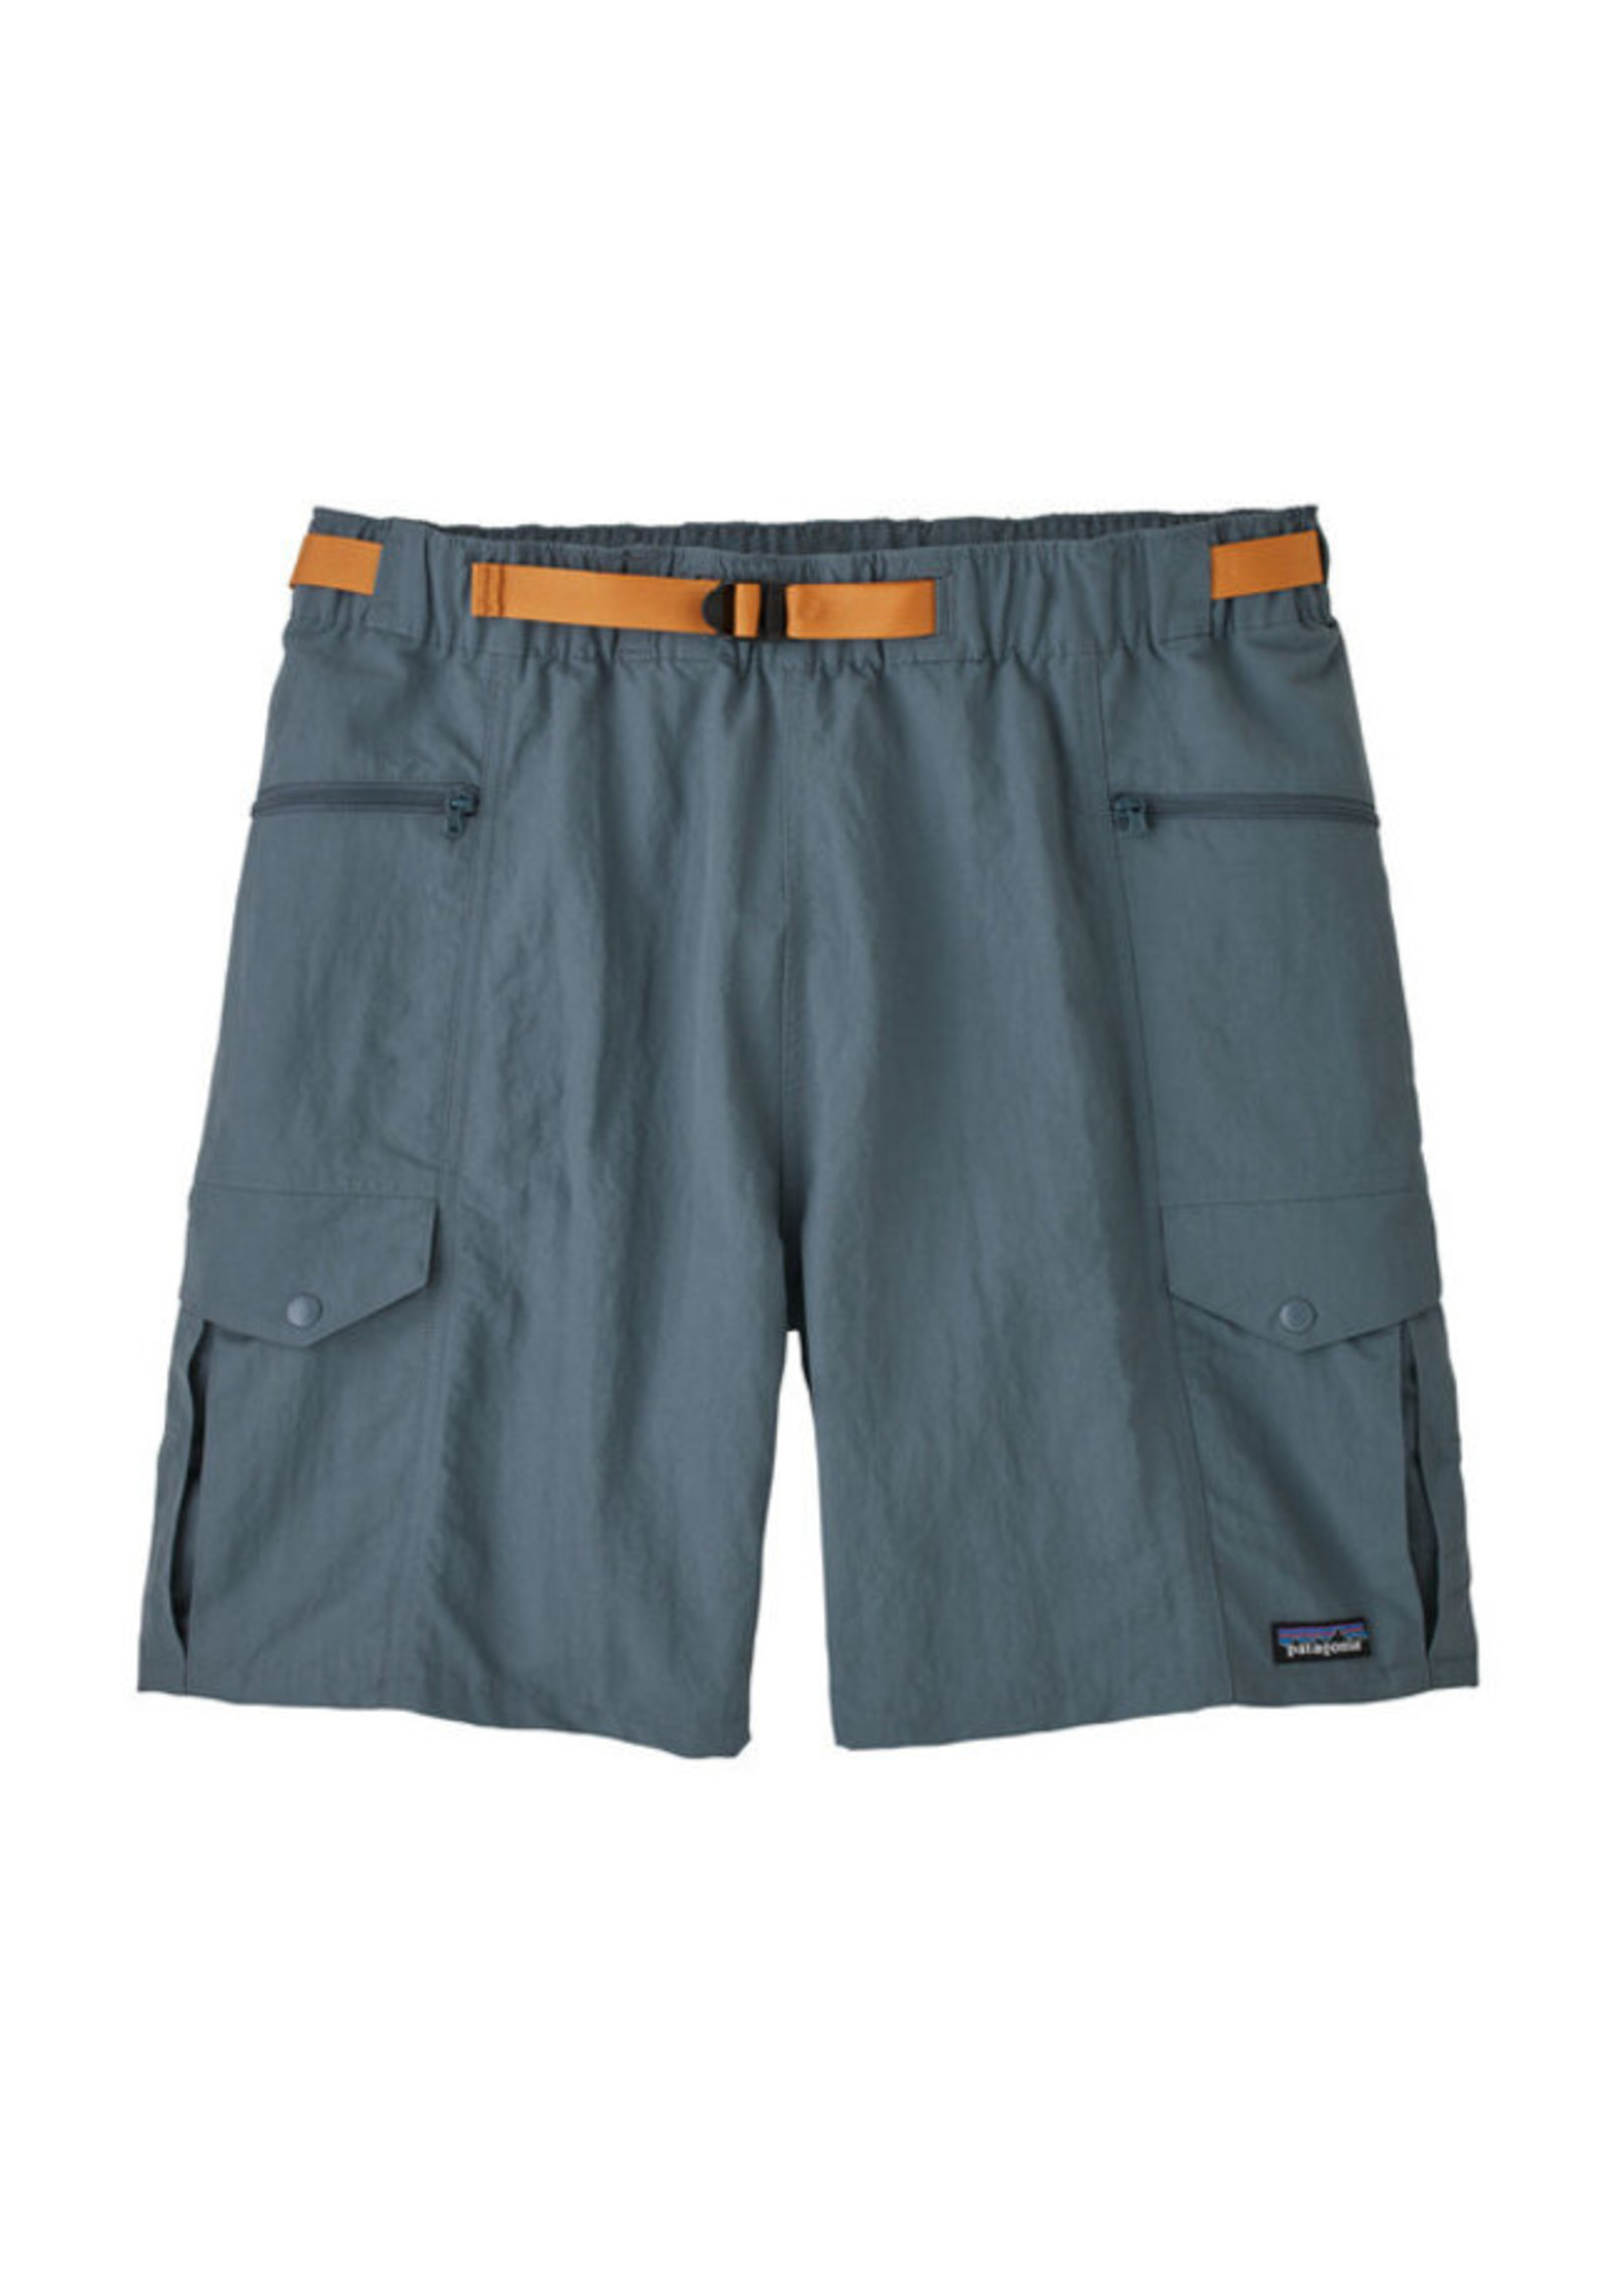 Patagonia Mens Outdoor Everyday Shorts - 7 in.